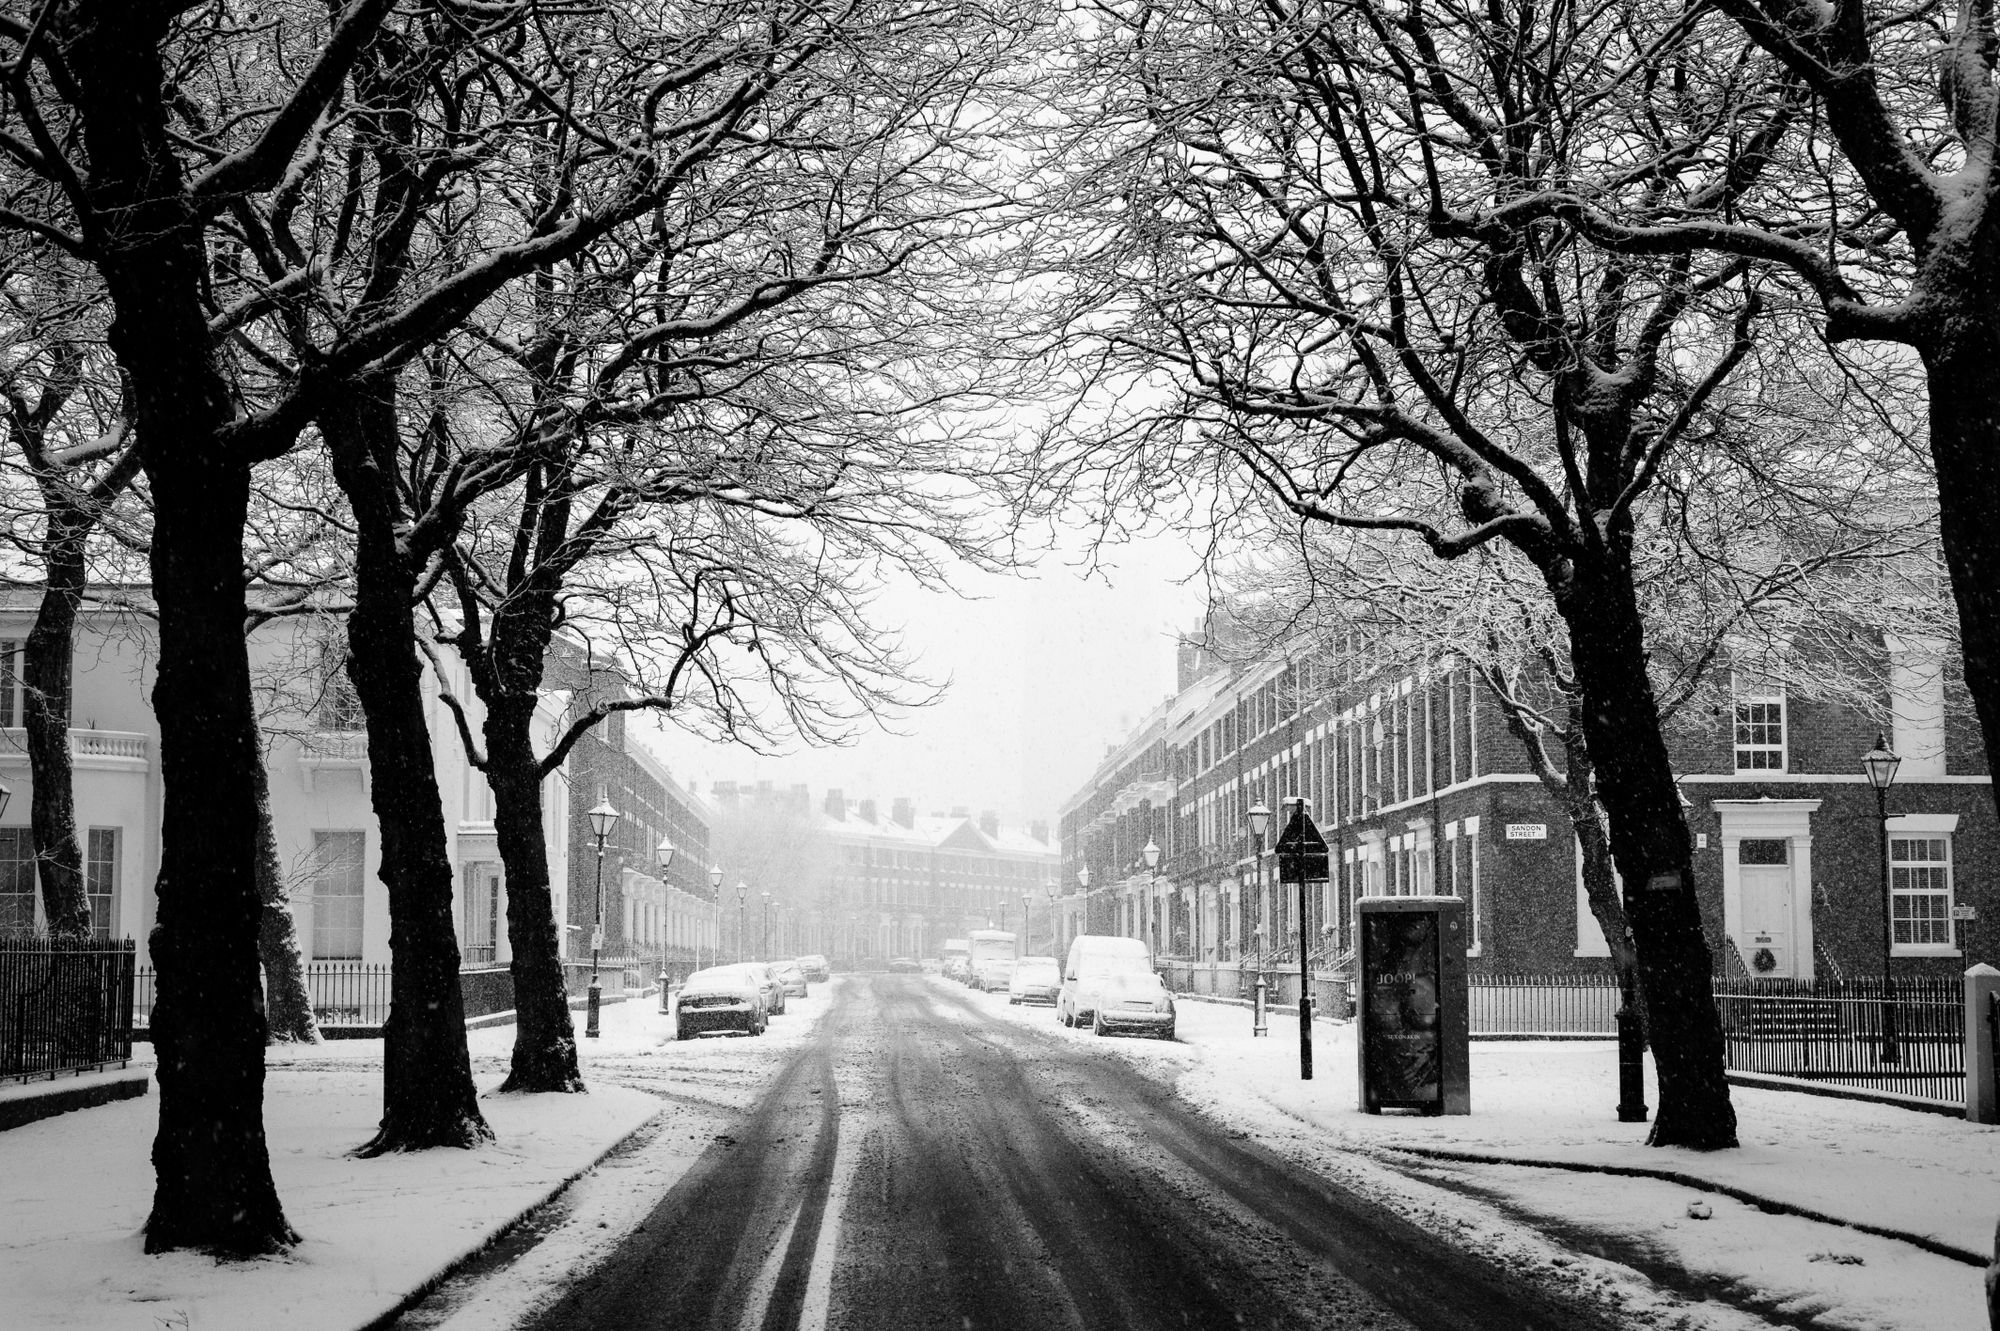 Snowy urban landscape featuring grand Victorian terraces and trees either side of the road.